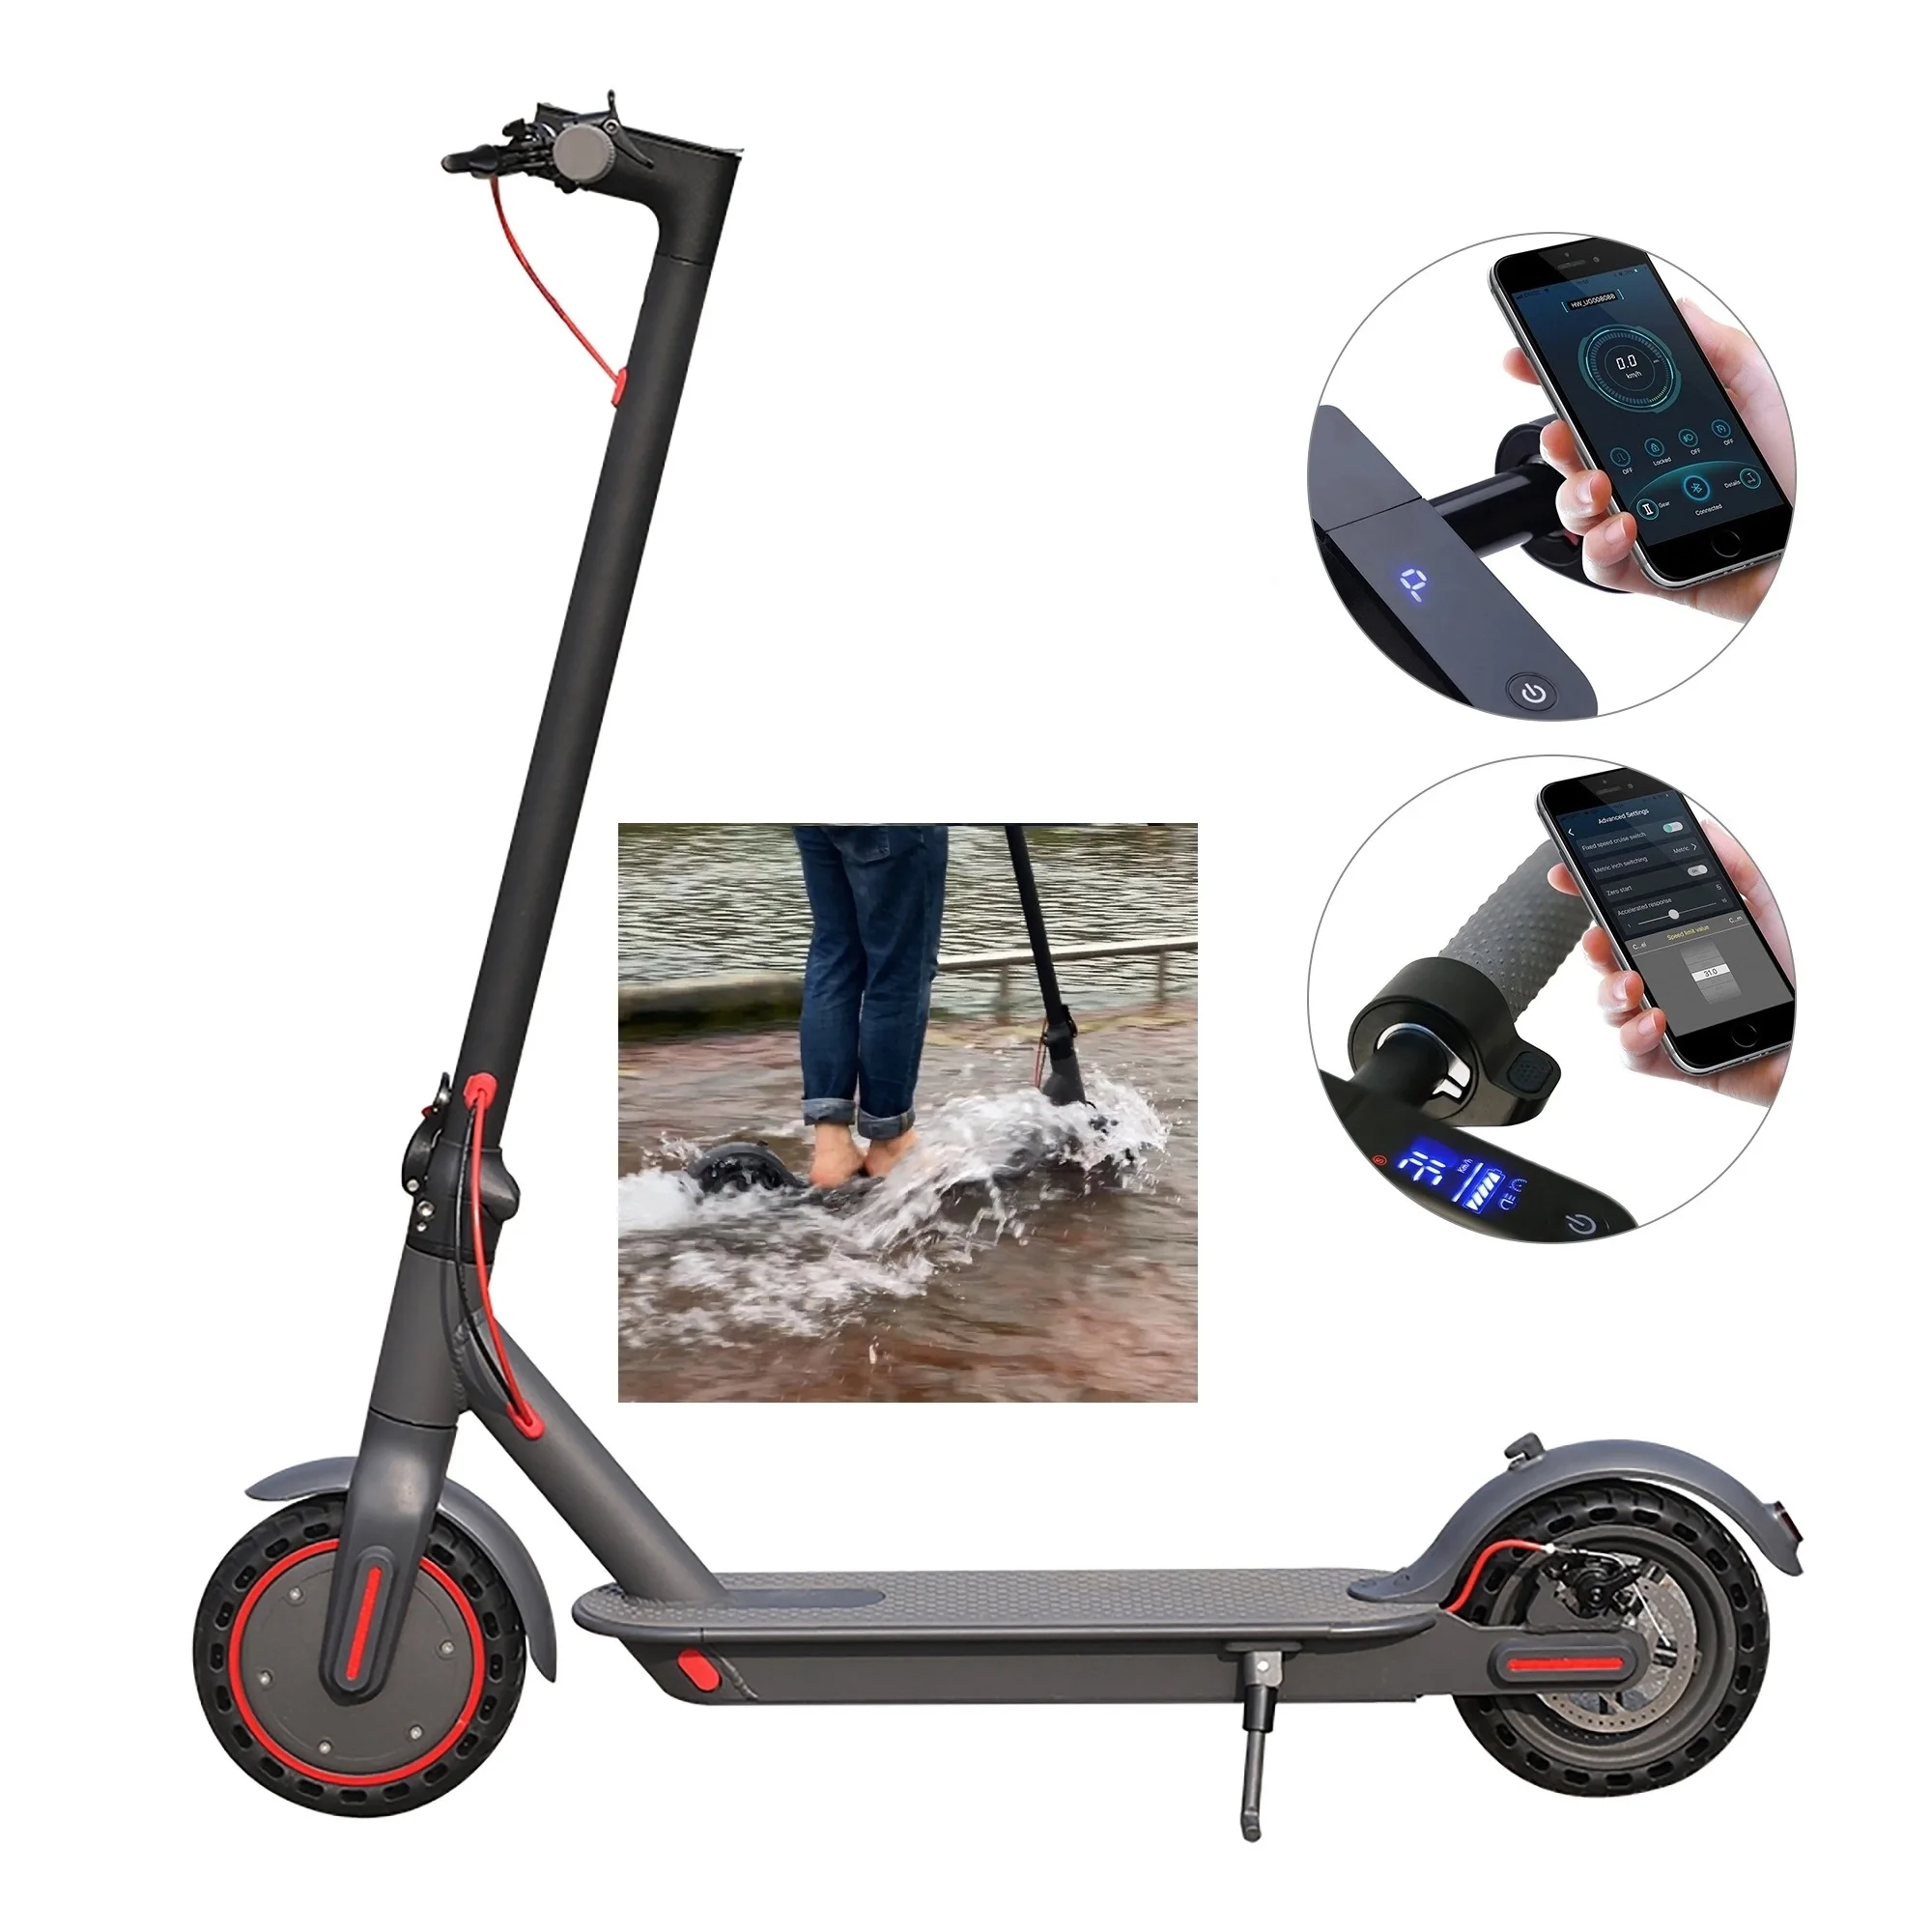 

Eu warehouse high quality AOVO M365 Pro e scooter 350W 8.5inch wheel foldable electric scooter with max range 32km